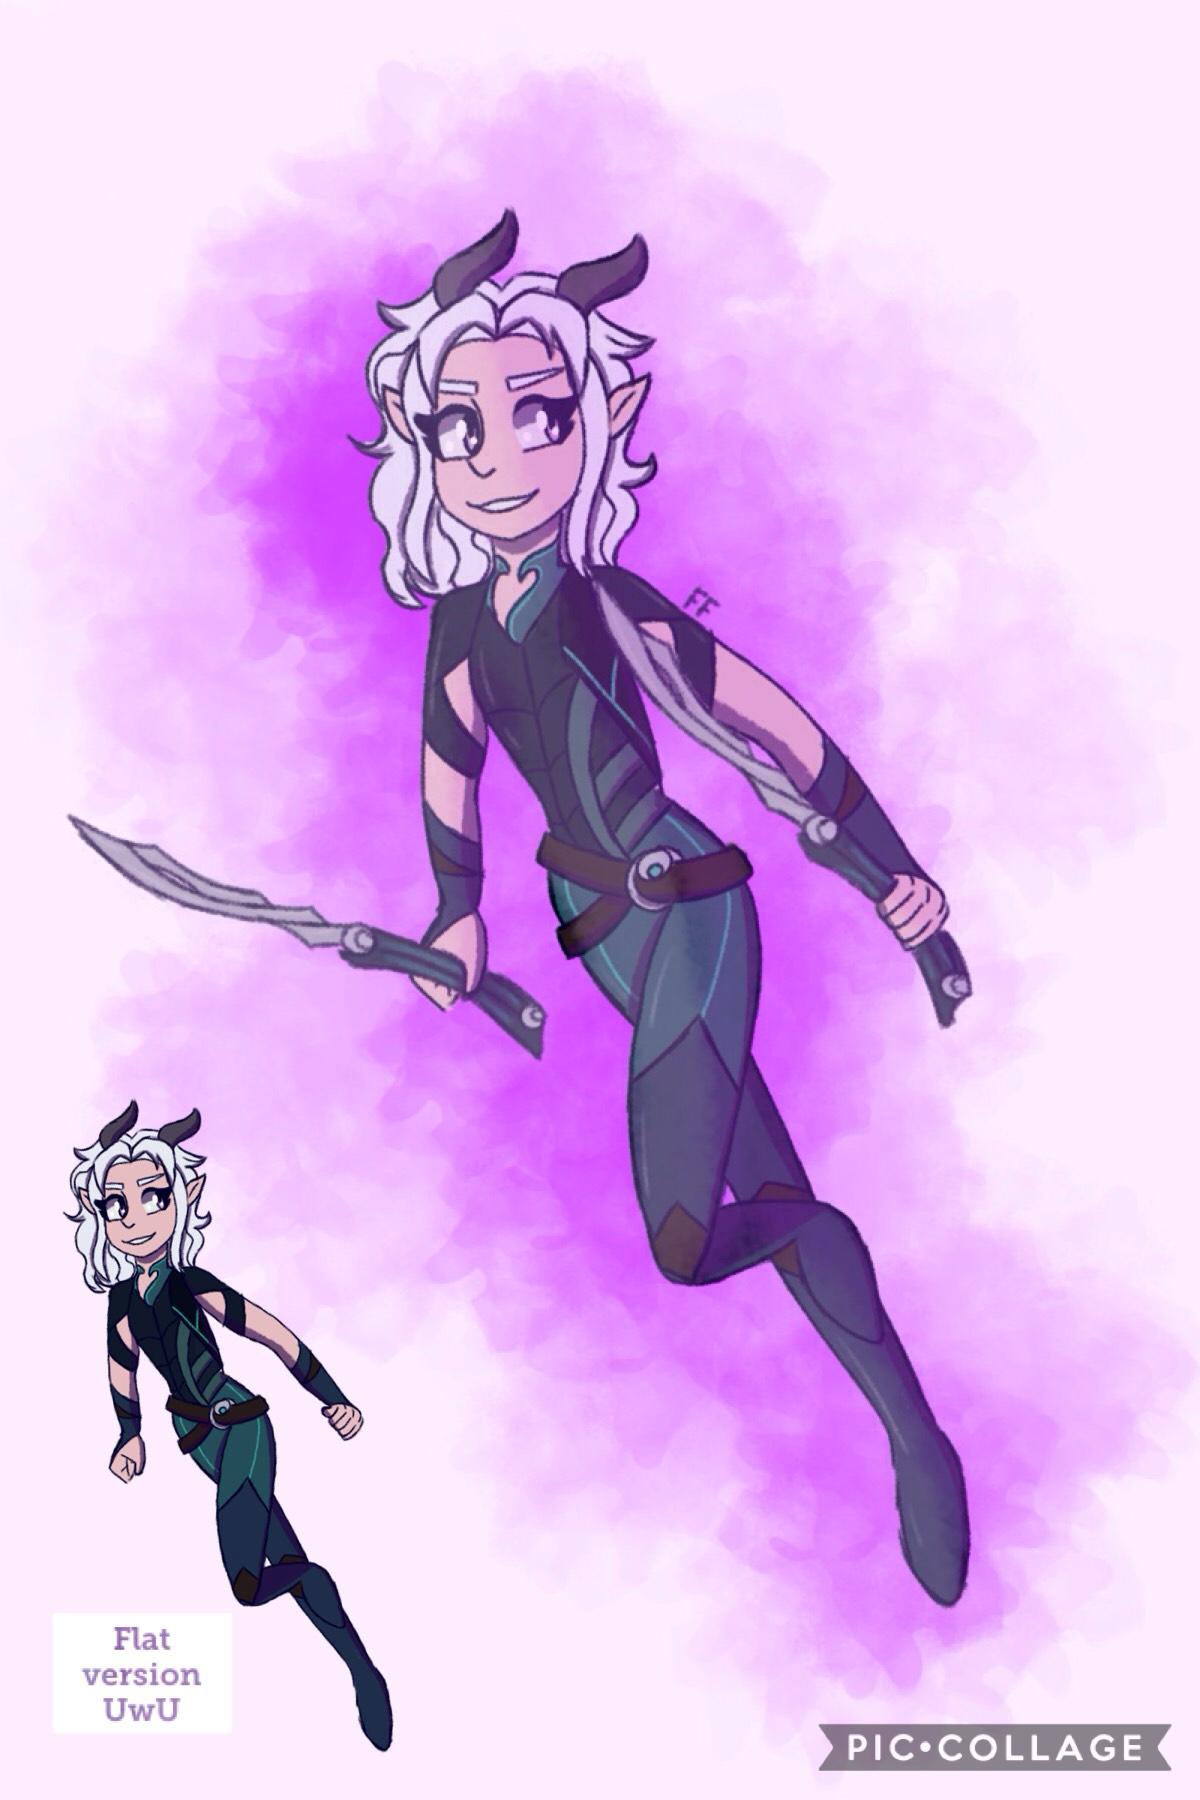 Rayla from The Dragon Prince!